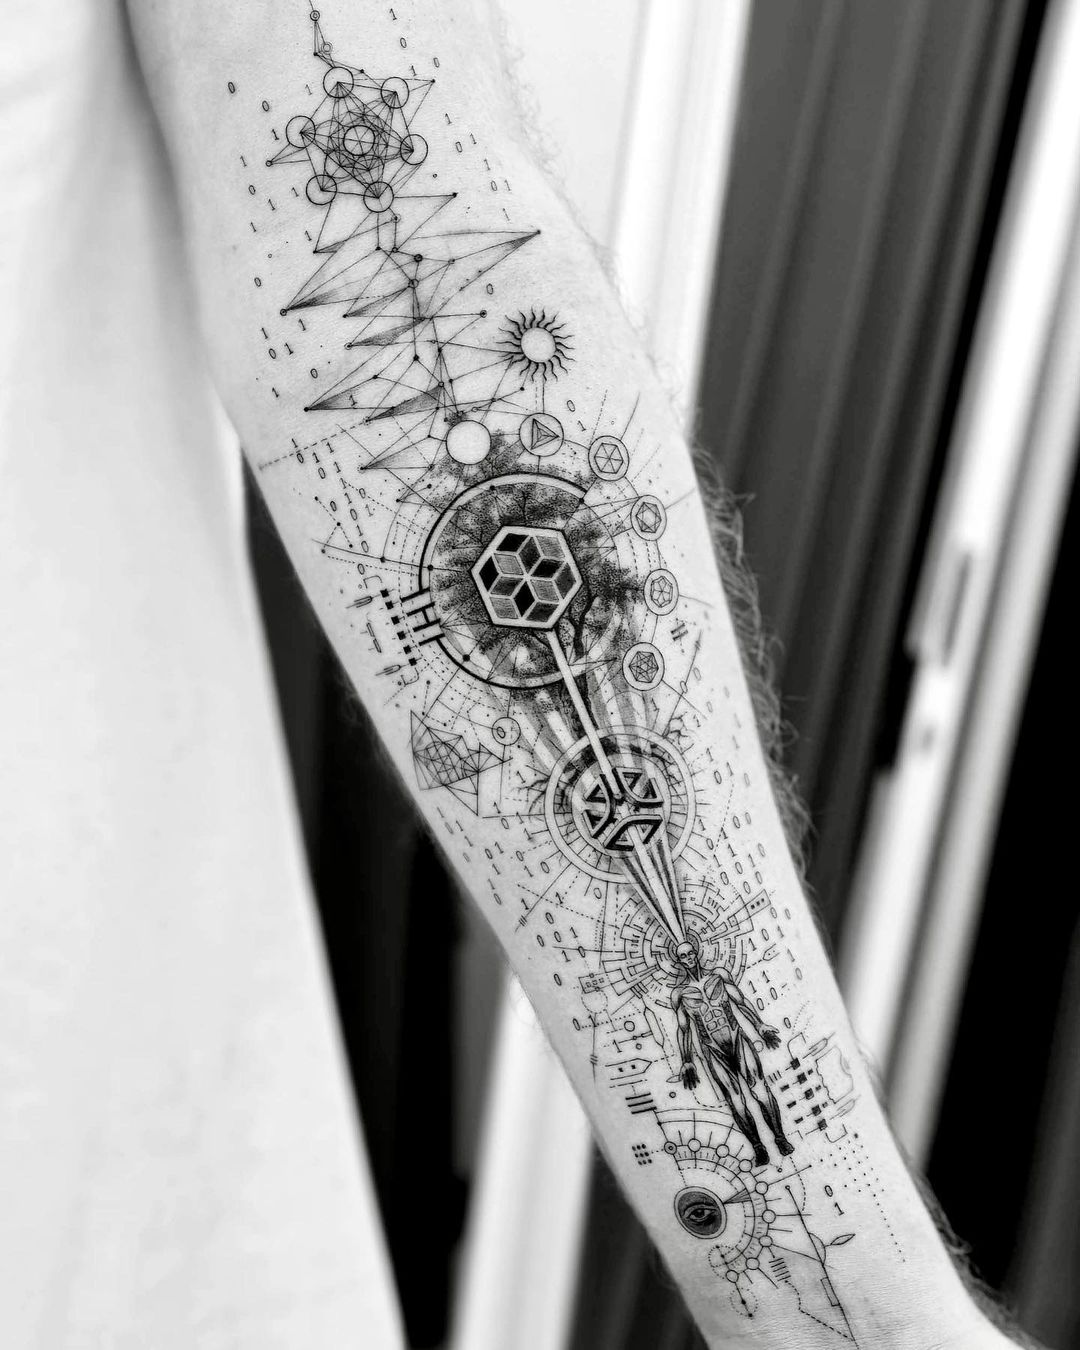 Forearm Tattoos with Meaning: The Deeper Meaning of Forearm Tattoo Art